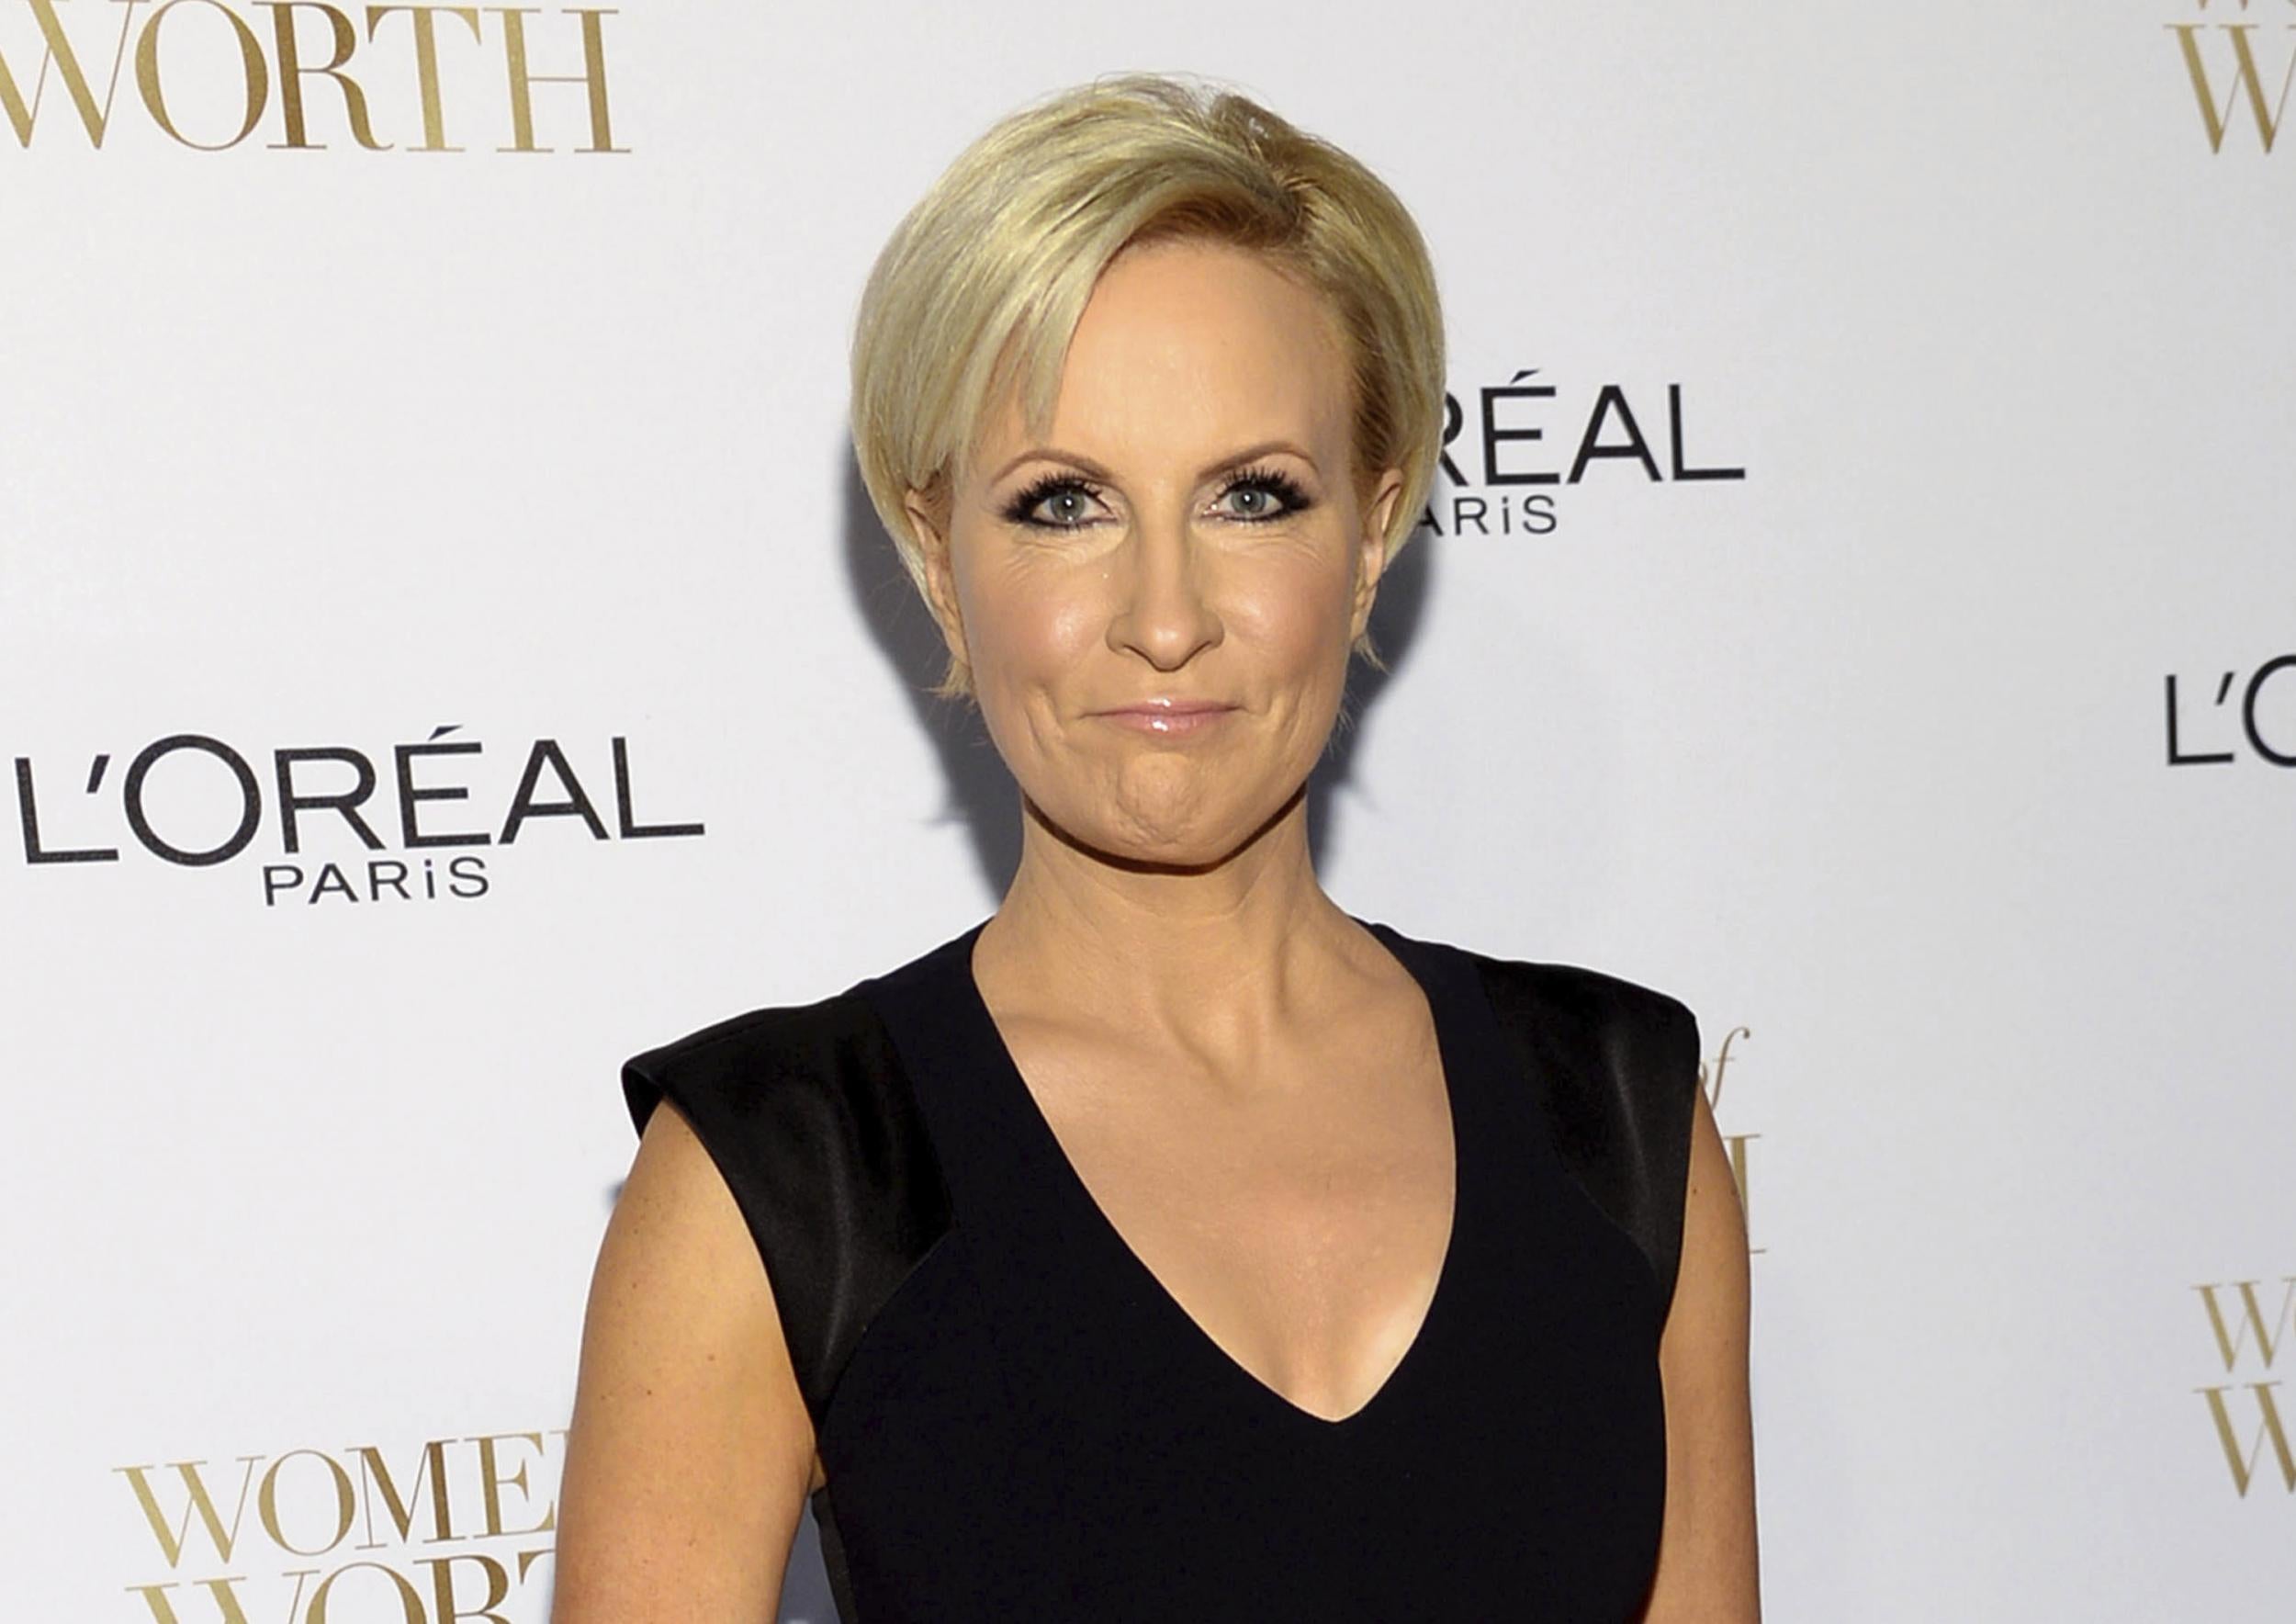 Mika Brzezinski arrives at the ninth annual Women of Worth Awards in New York